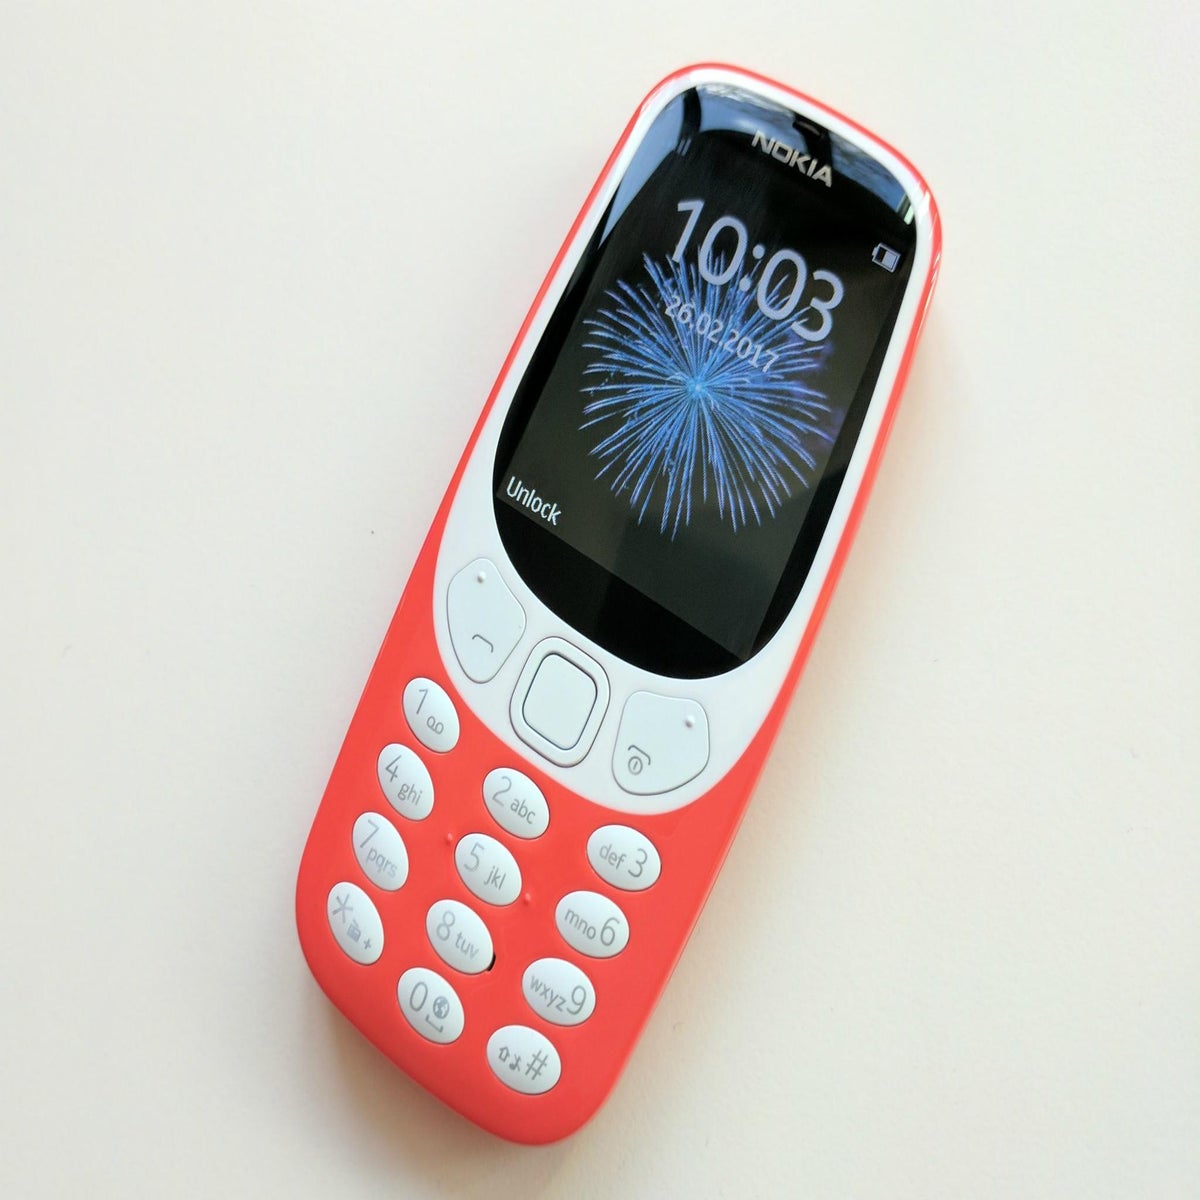 The new Nokia 3310 is too basic for 2017